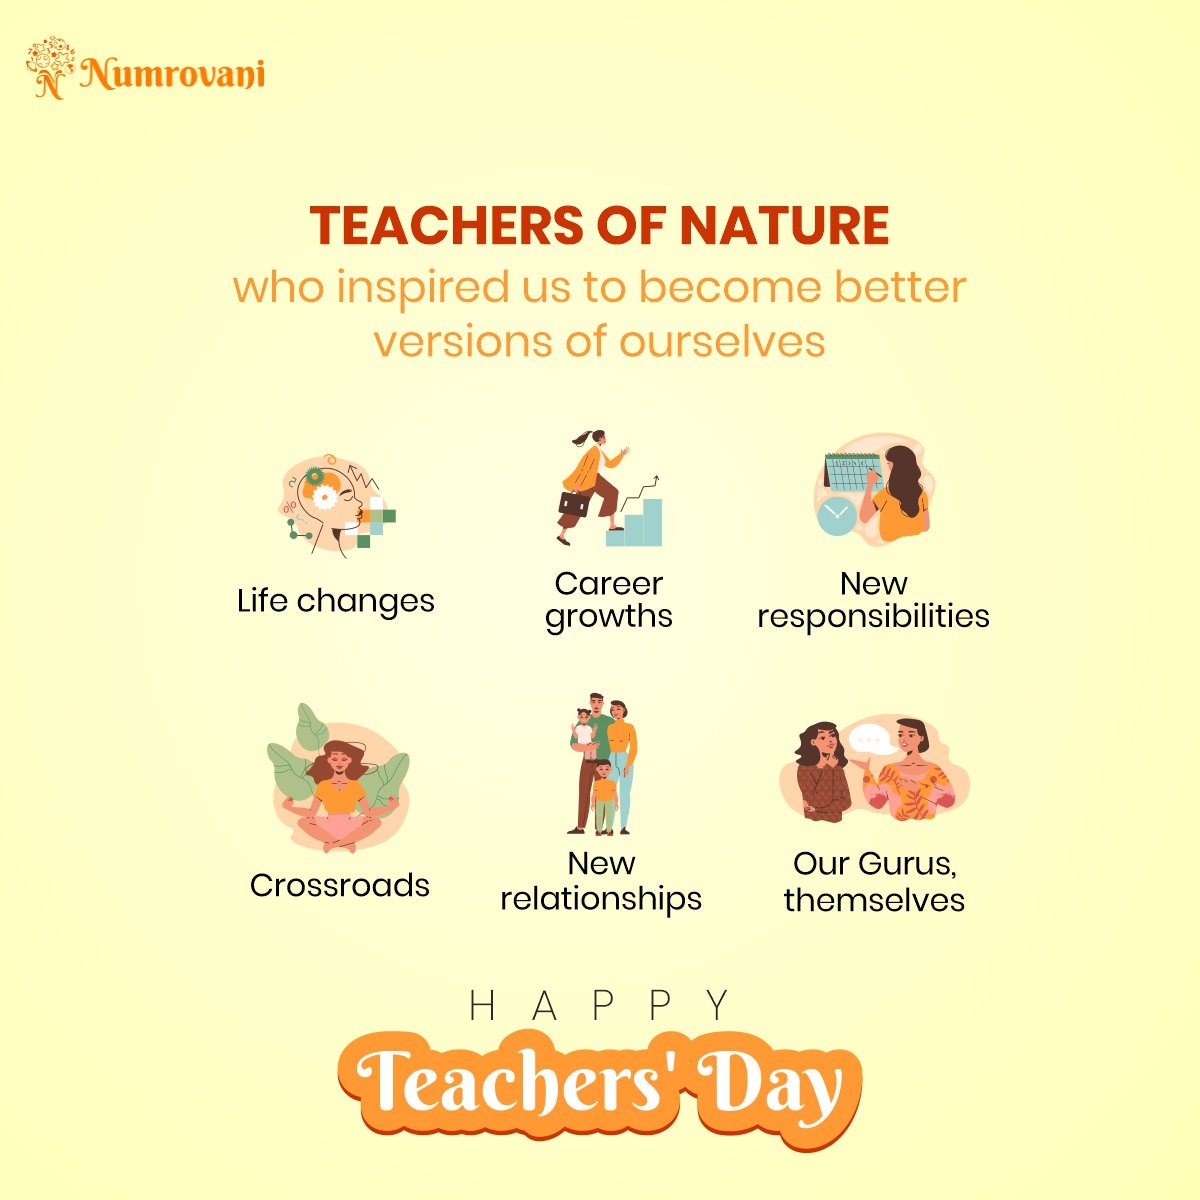 Happy Teachers' Day from NumroVani! 📚 Life's Gurus come in many forms, guiding us through its twists and turns. Thank you for your wisdom and support. 🙏🏽

 #TeachersDay #Gratitude 
#NumroVani #TeachersDay #AstroNumerology #HolisticWellness #PersonalizedSolutions #Numerology